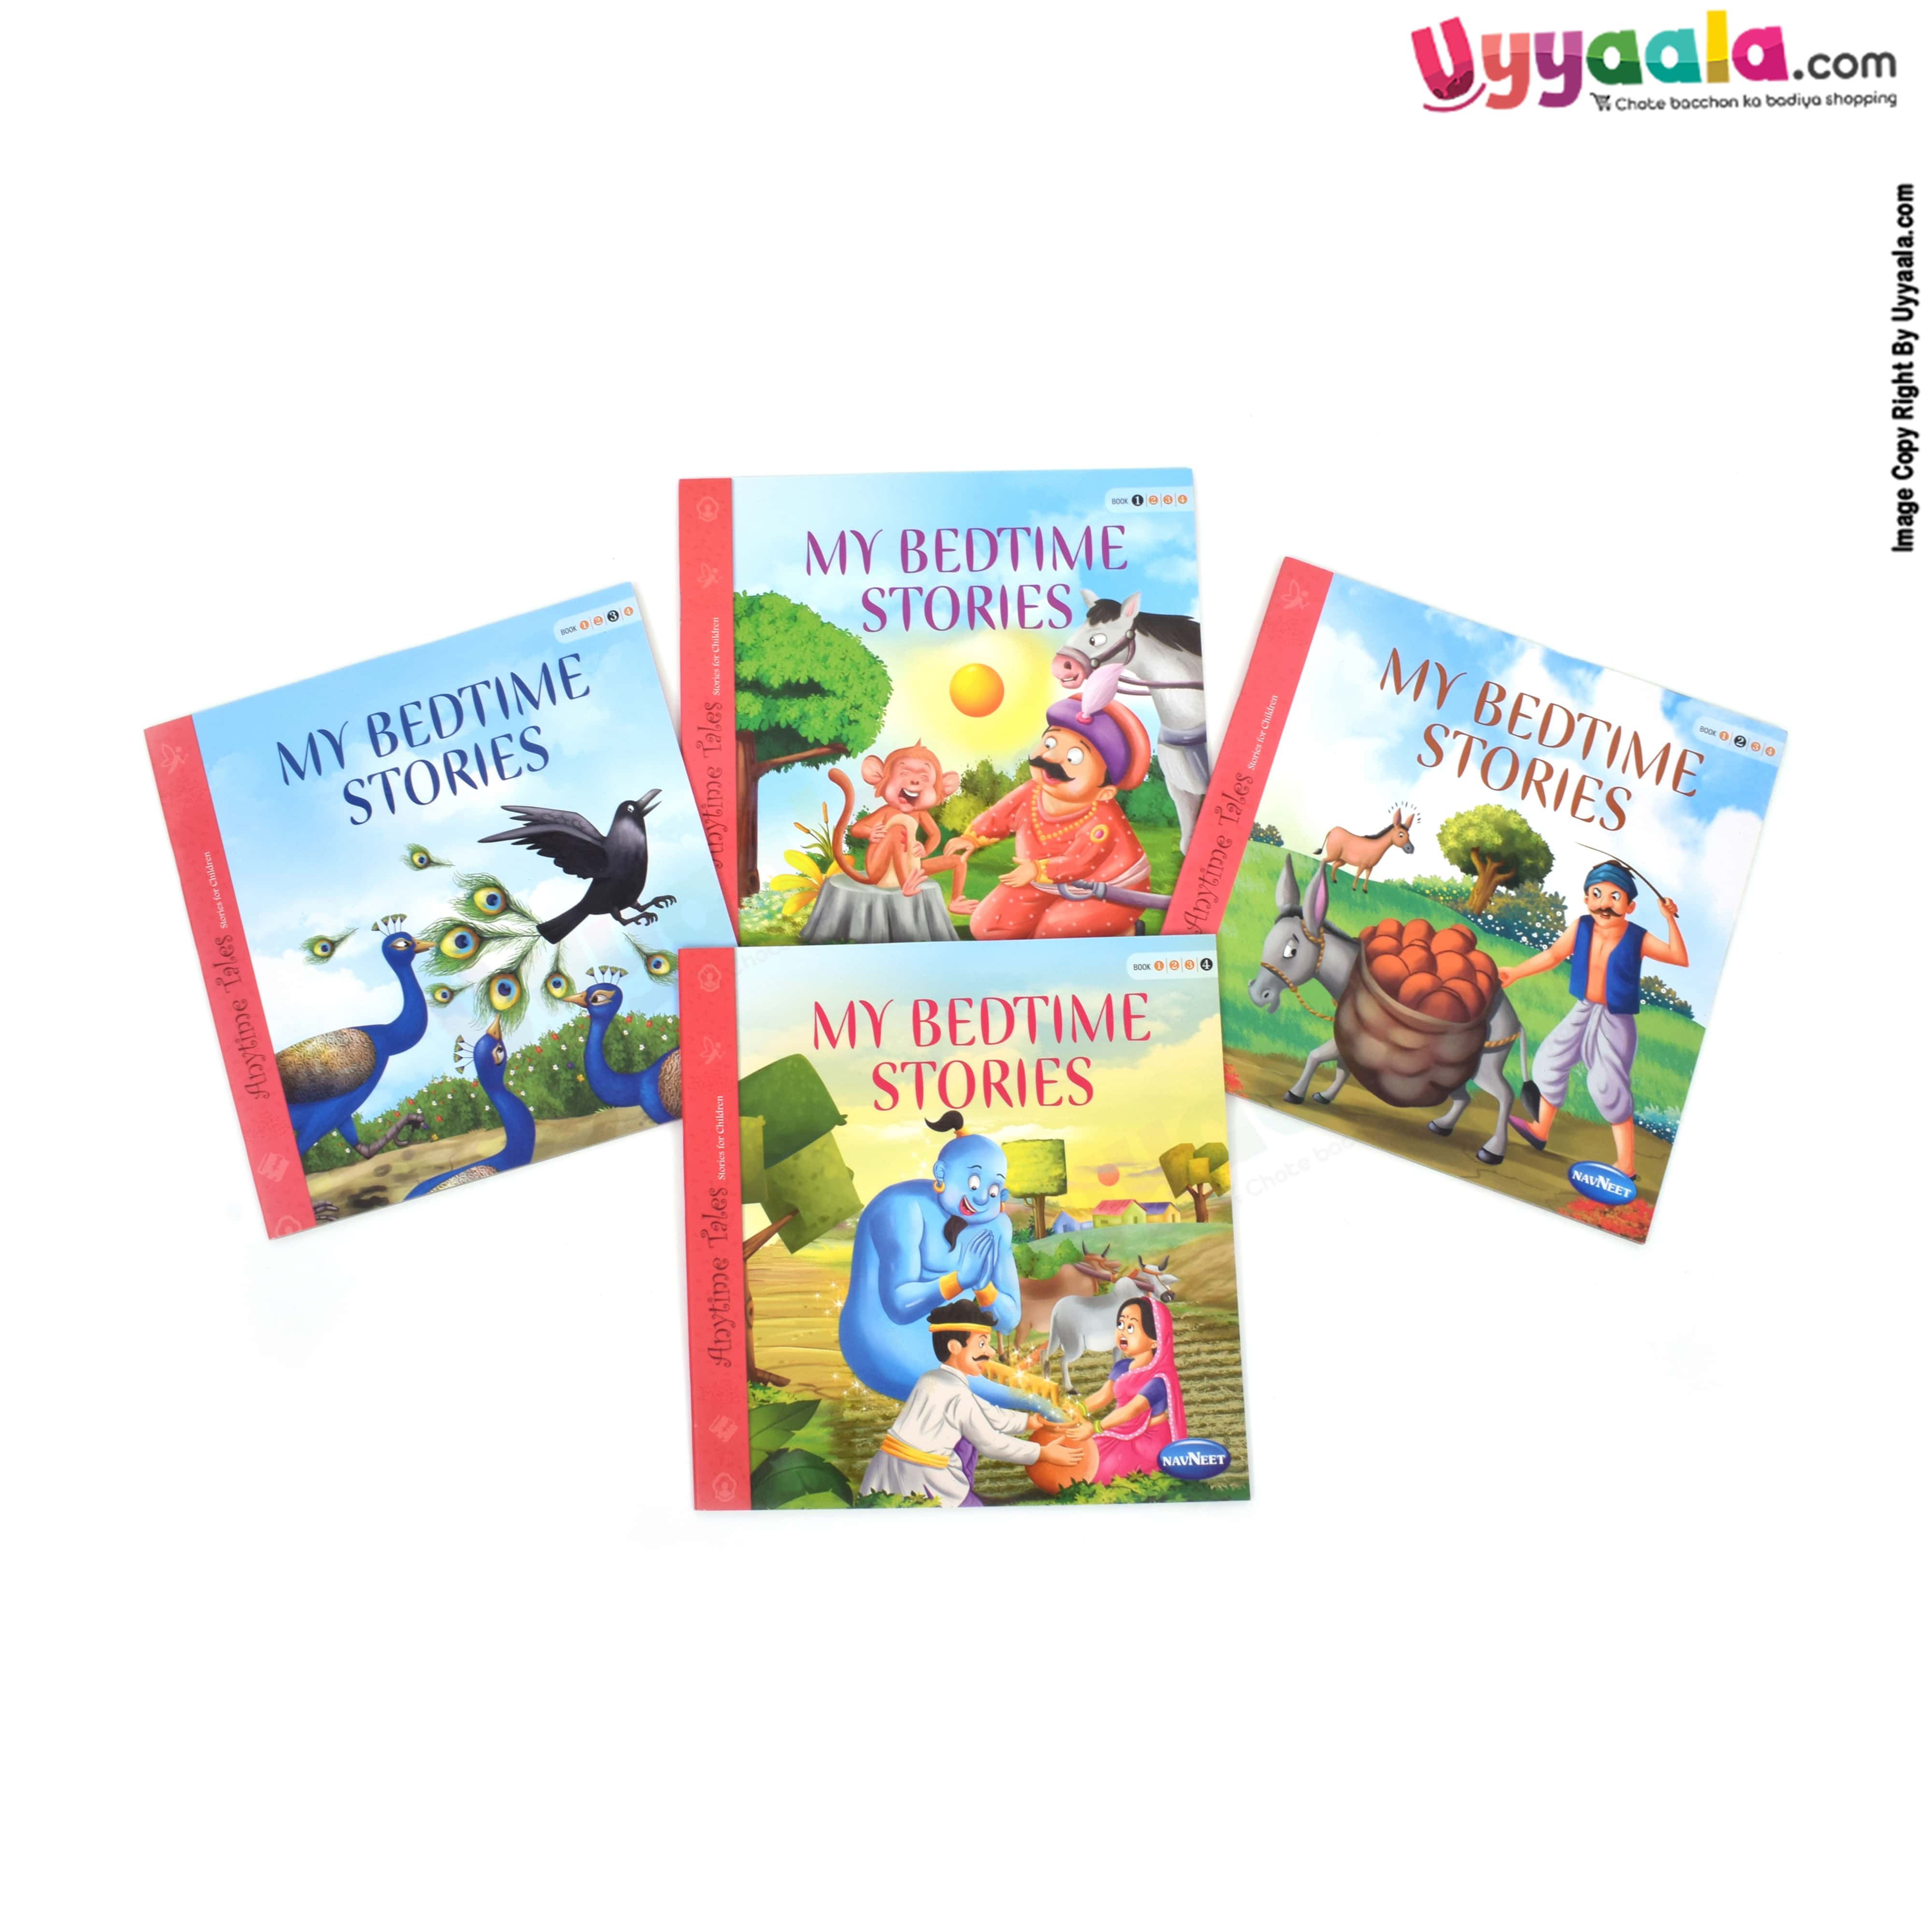 NAVNEET any time tales stories for children, my bed time stories pack of 4 - 4 volumes